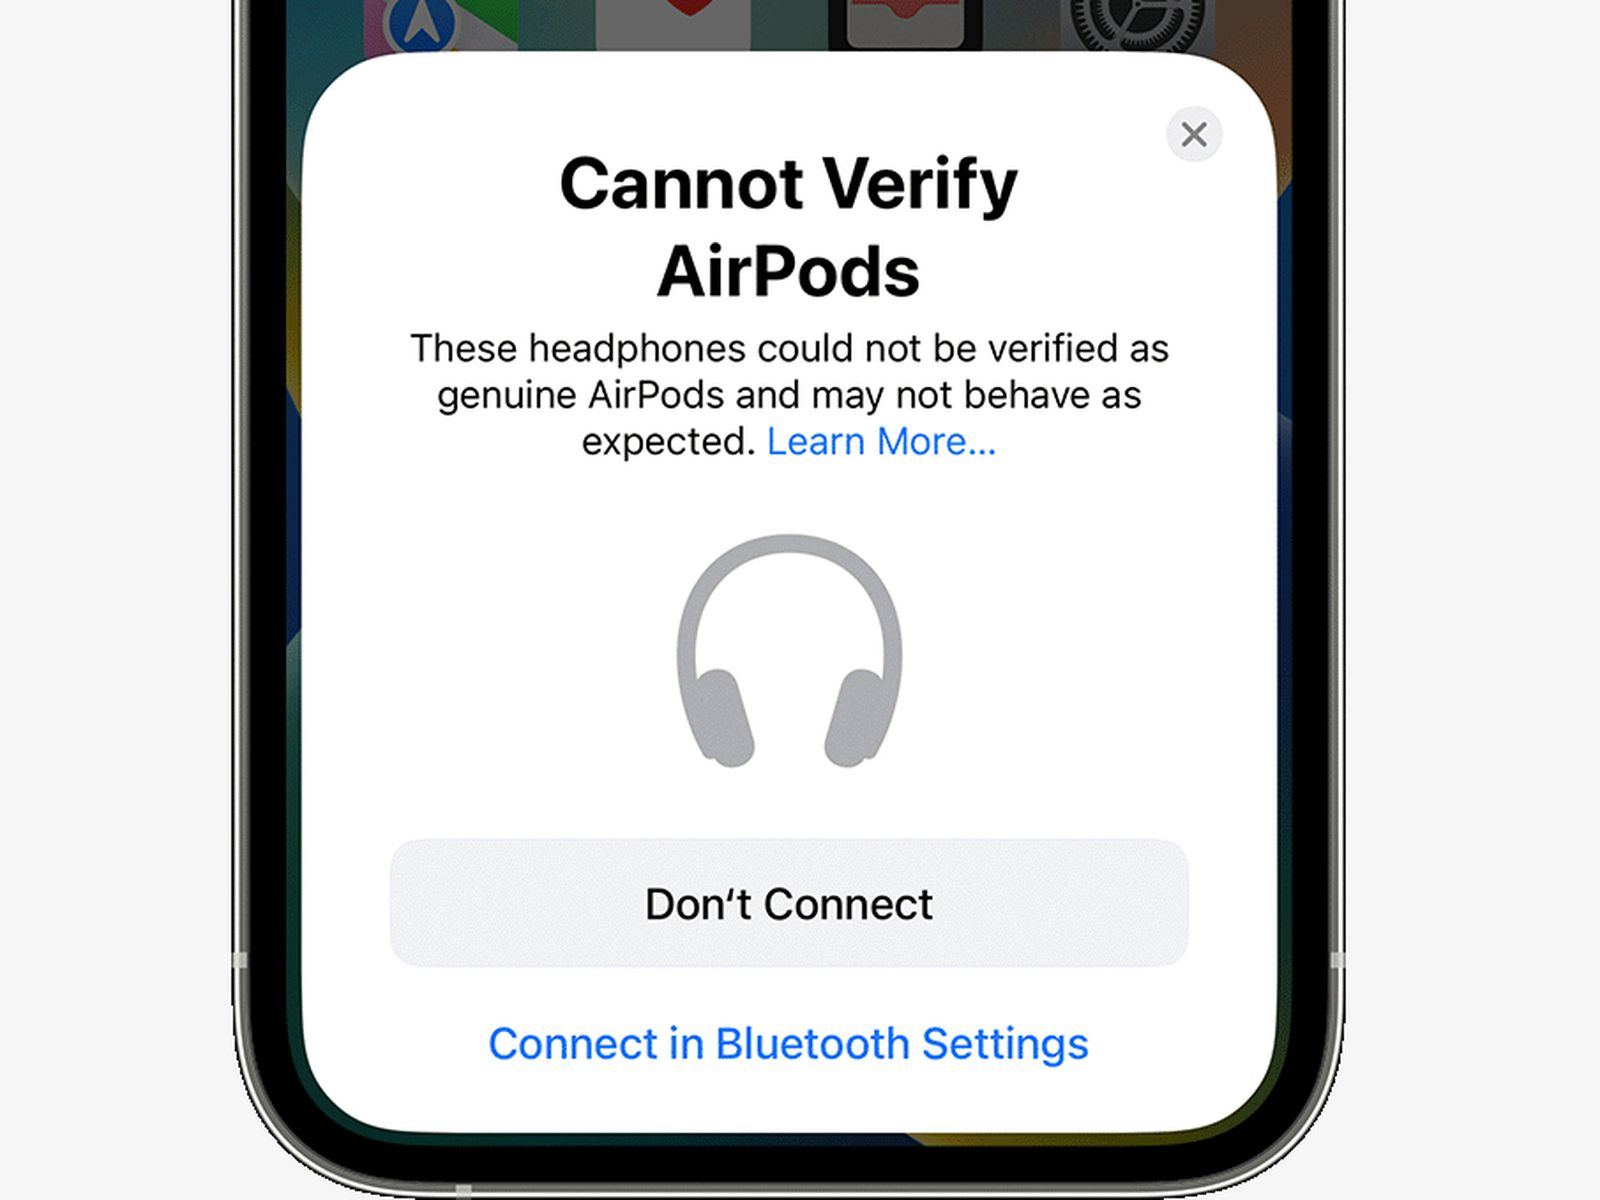 Apple Explains iPhone's New Alert When Fake Are Connected MacRumors